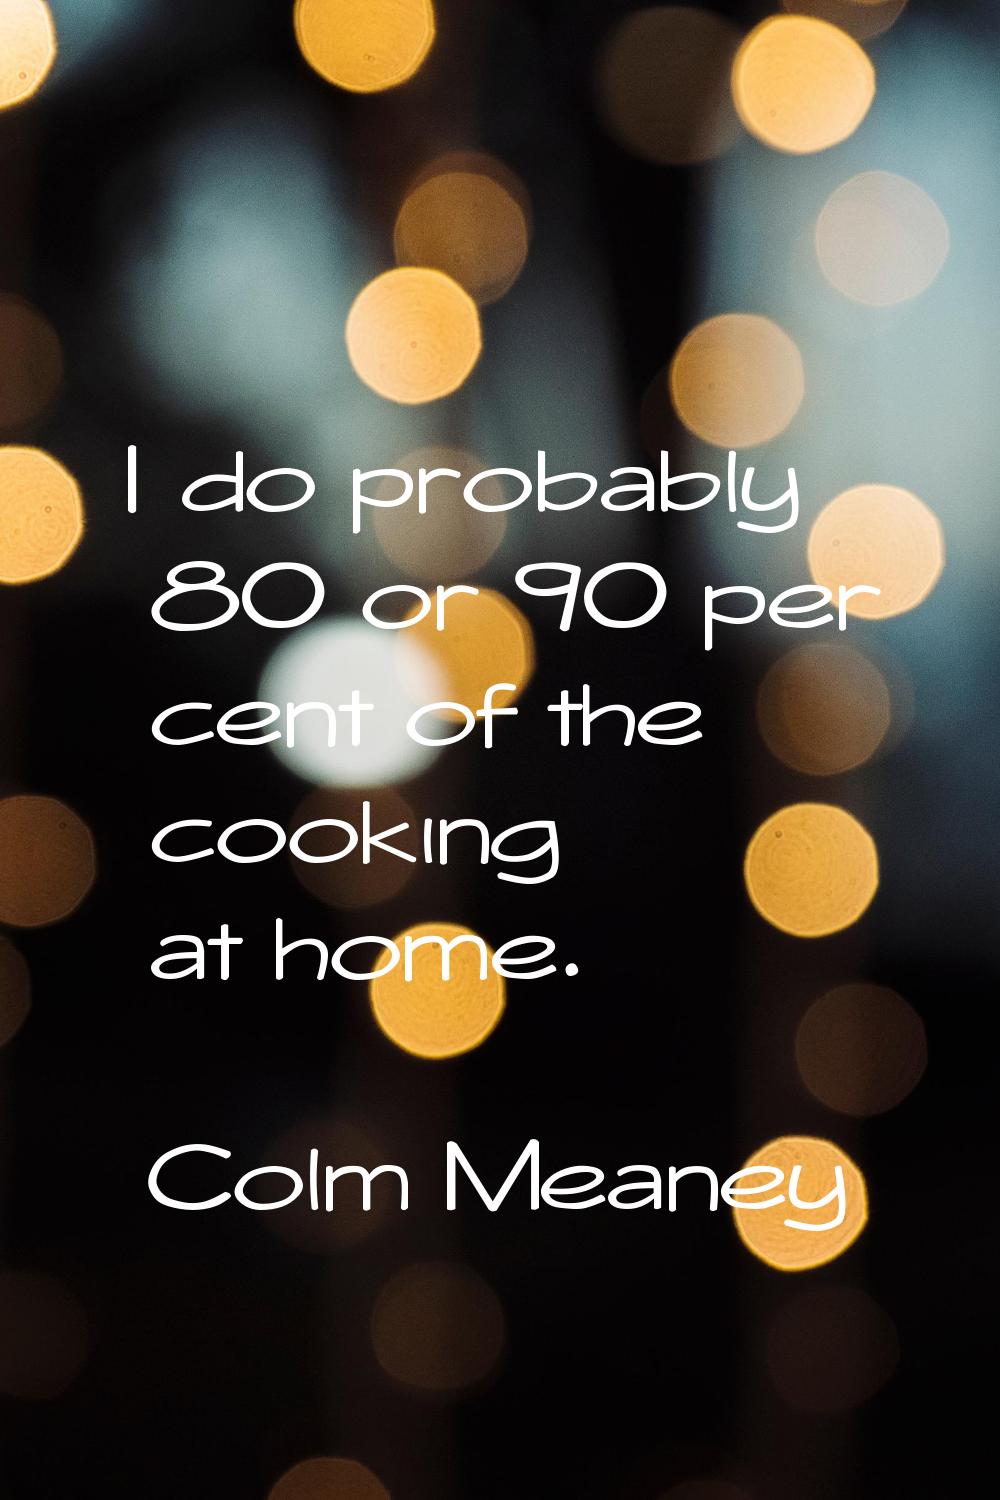 I do probably 80 or 90 per cent of the cooking at home.